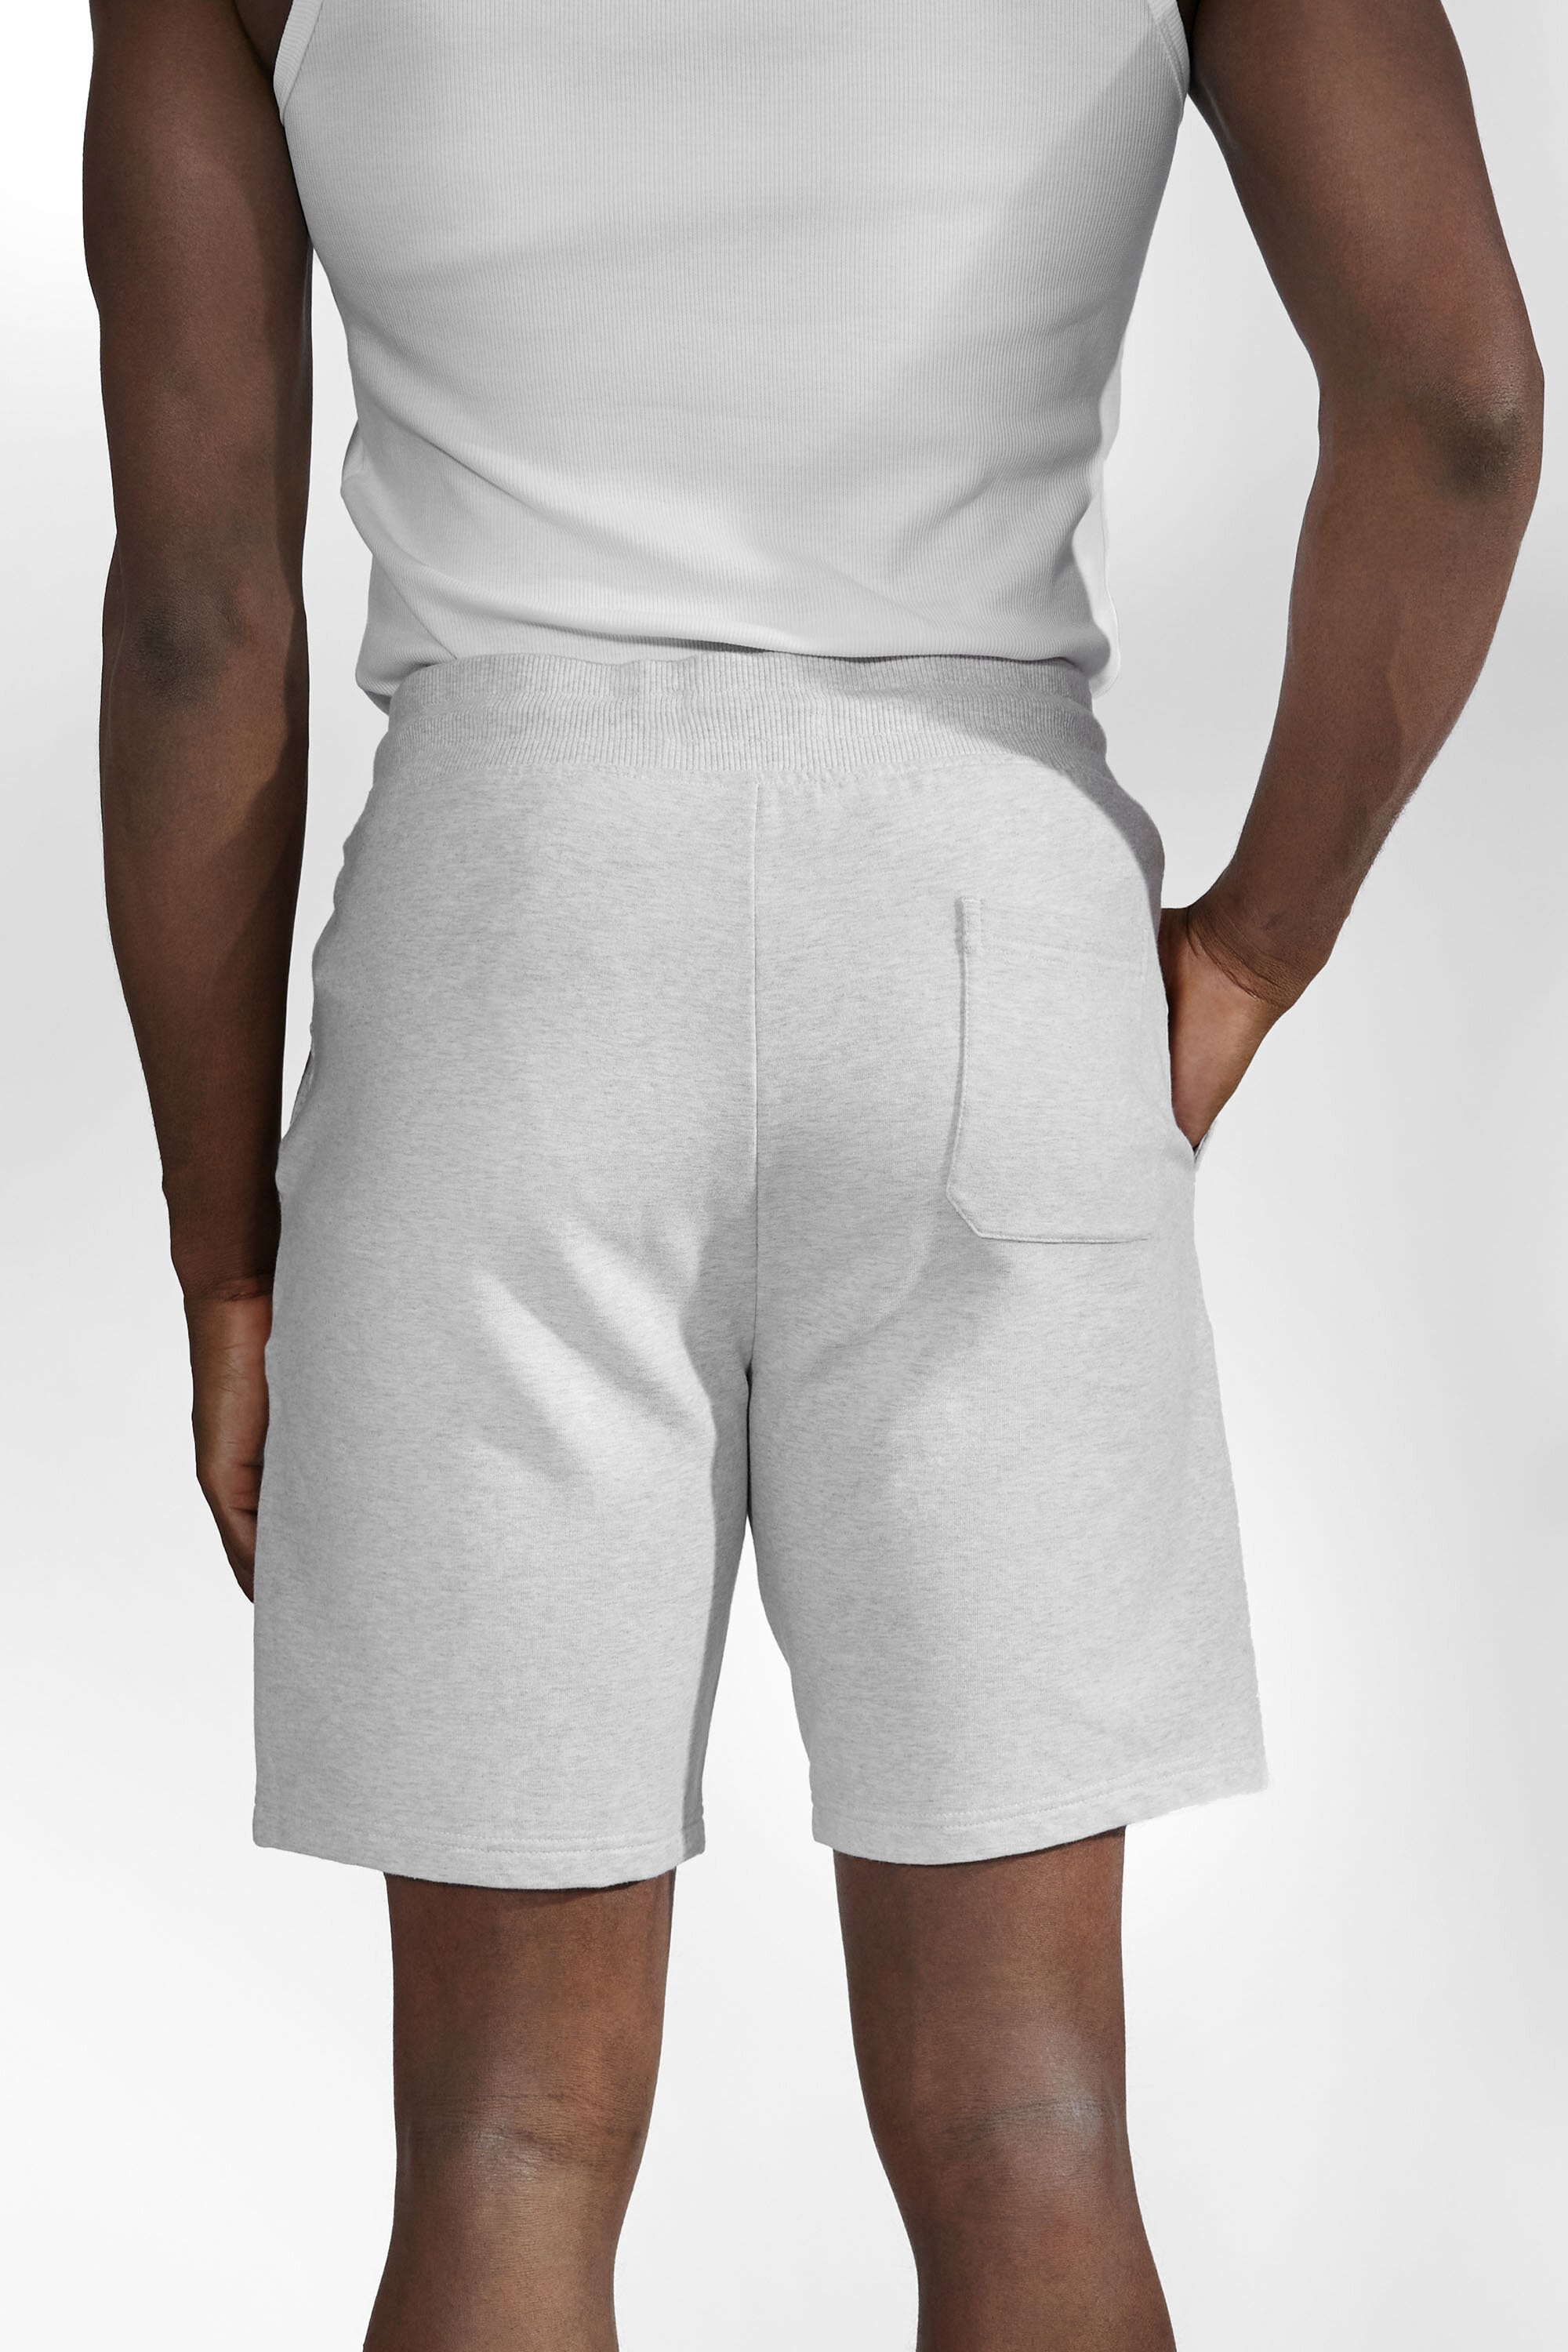 Iron Grey Shorts Active for men. Buy Active Sports Wear at Bread